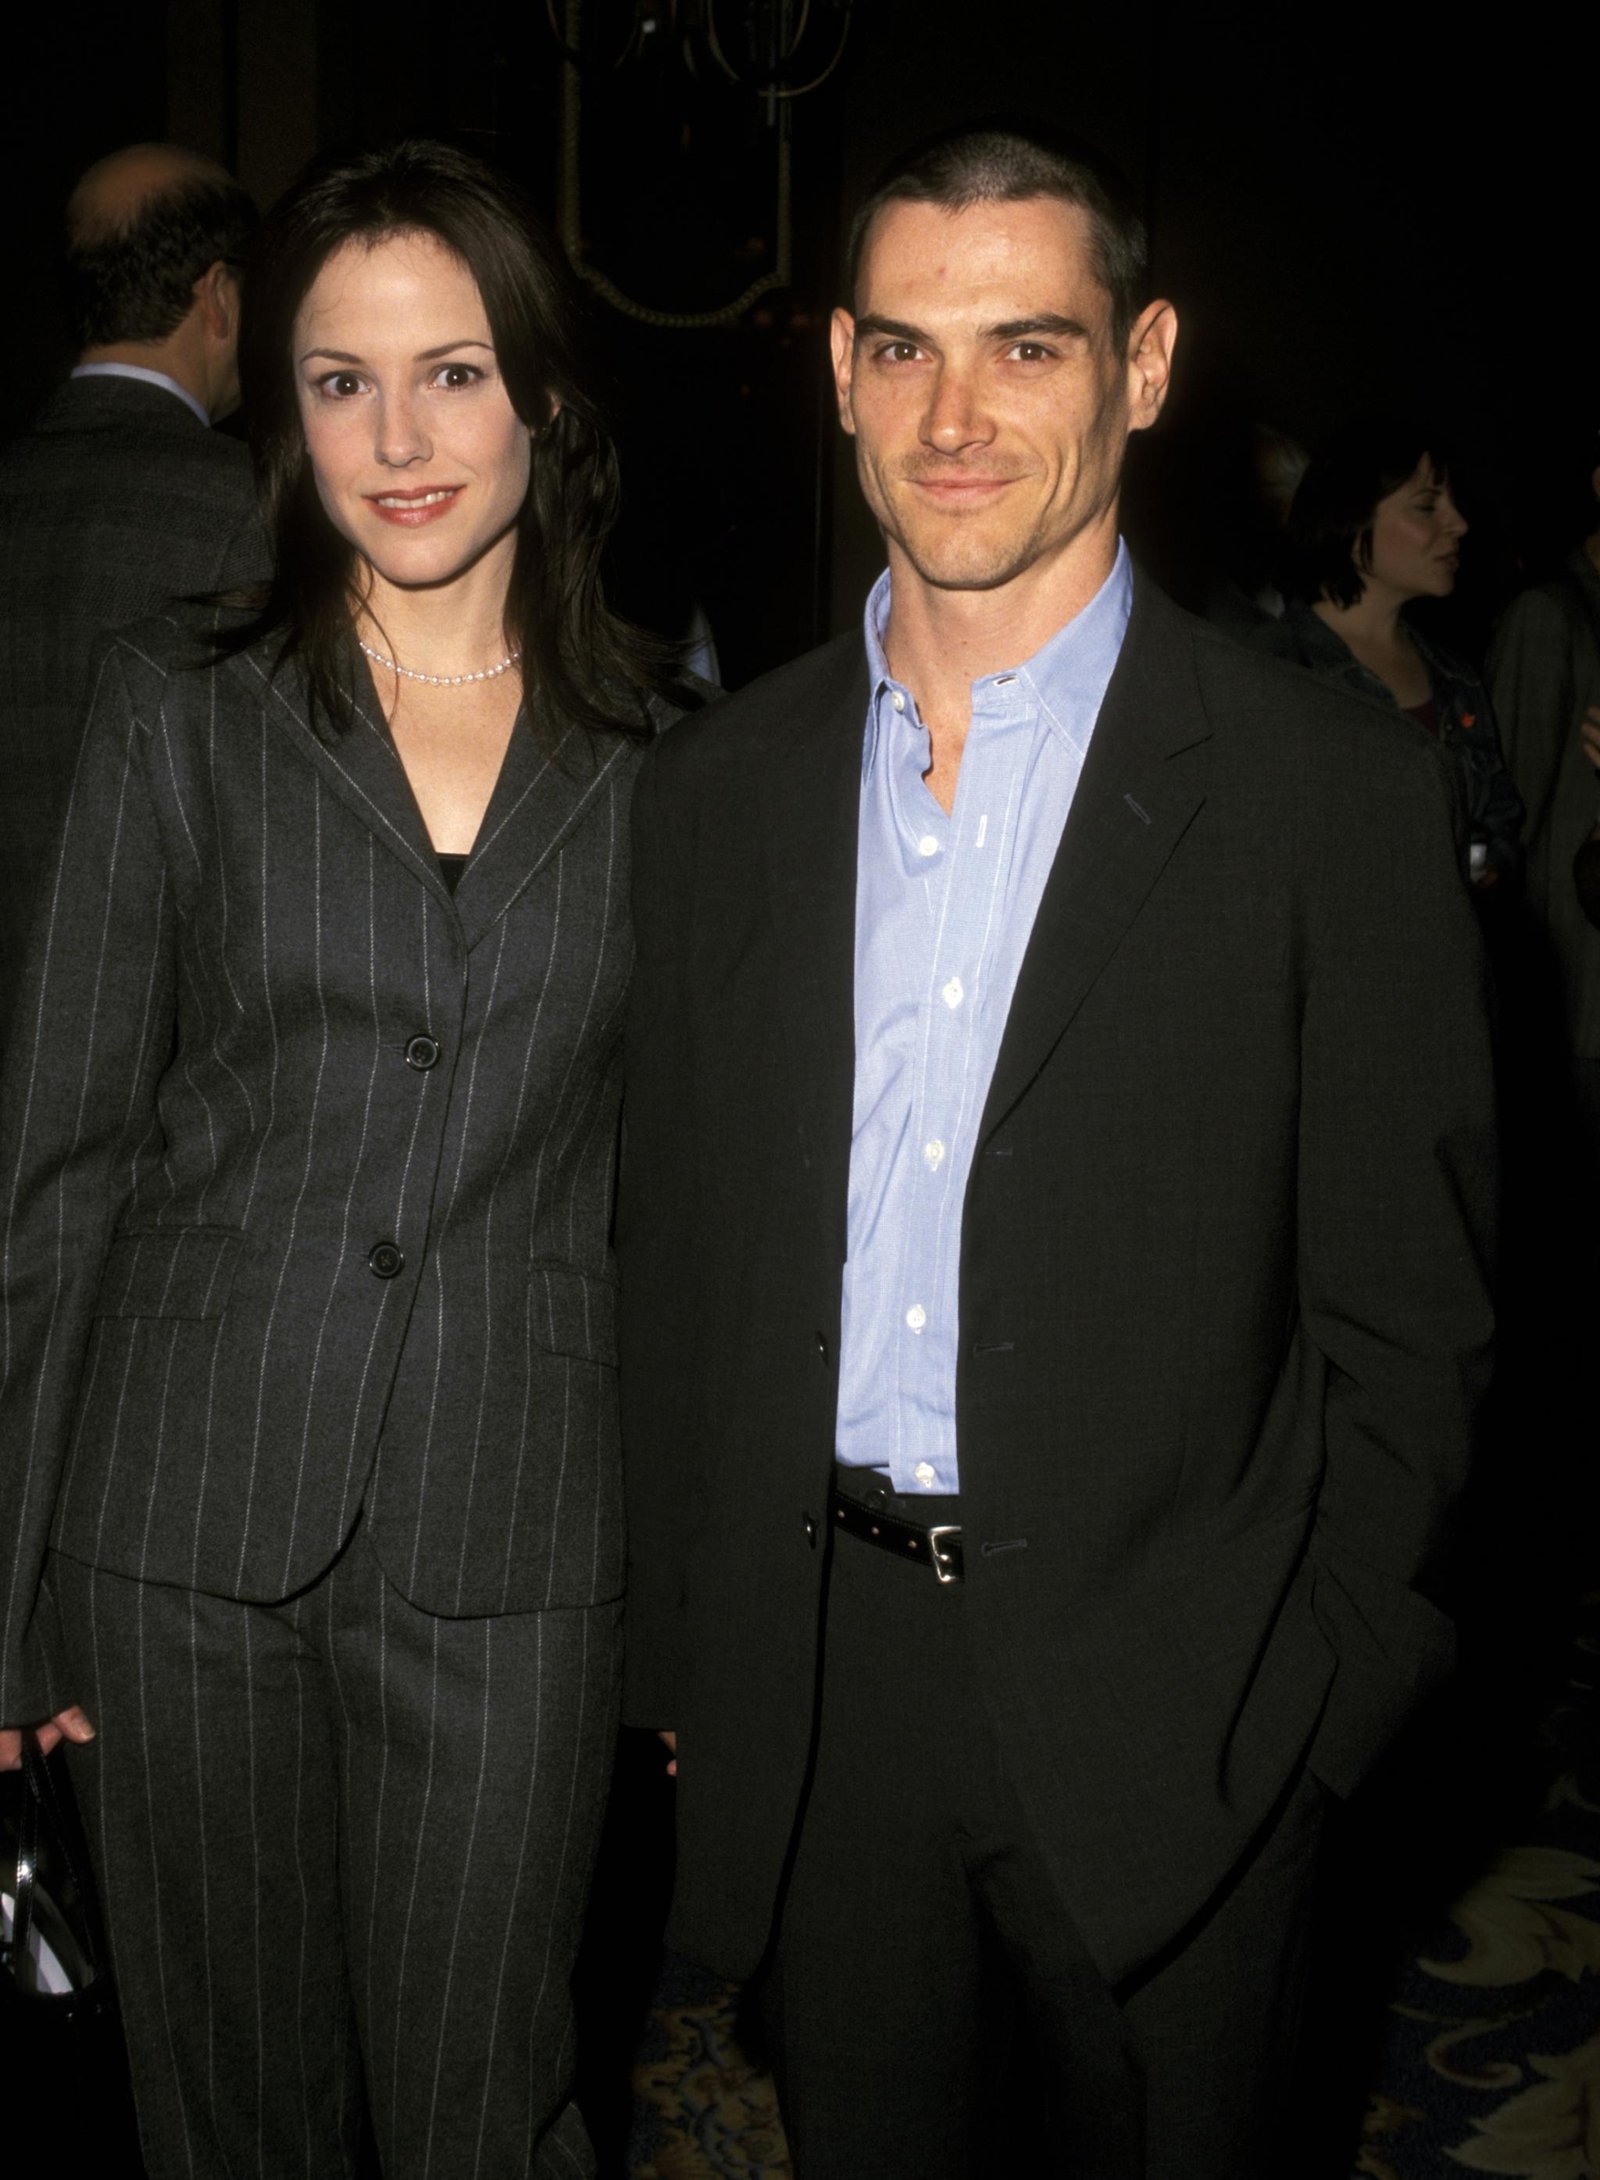 Billy Crudup with Mary-Louise Parker.